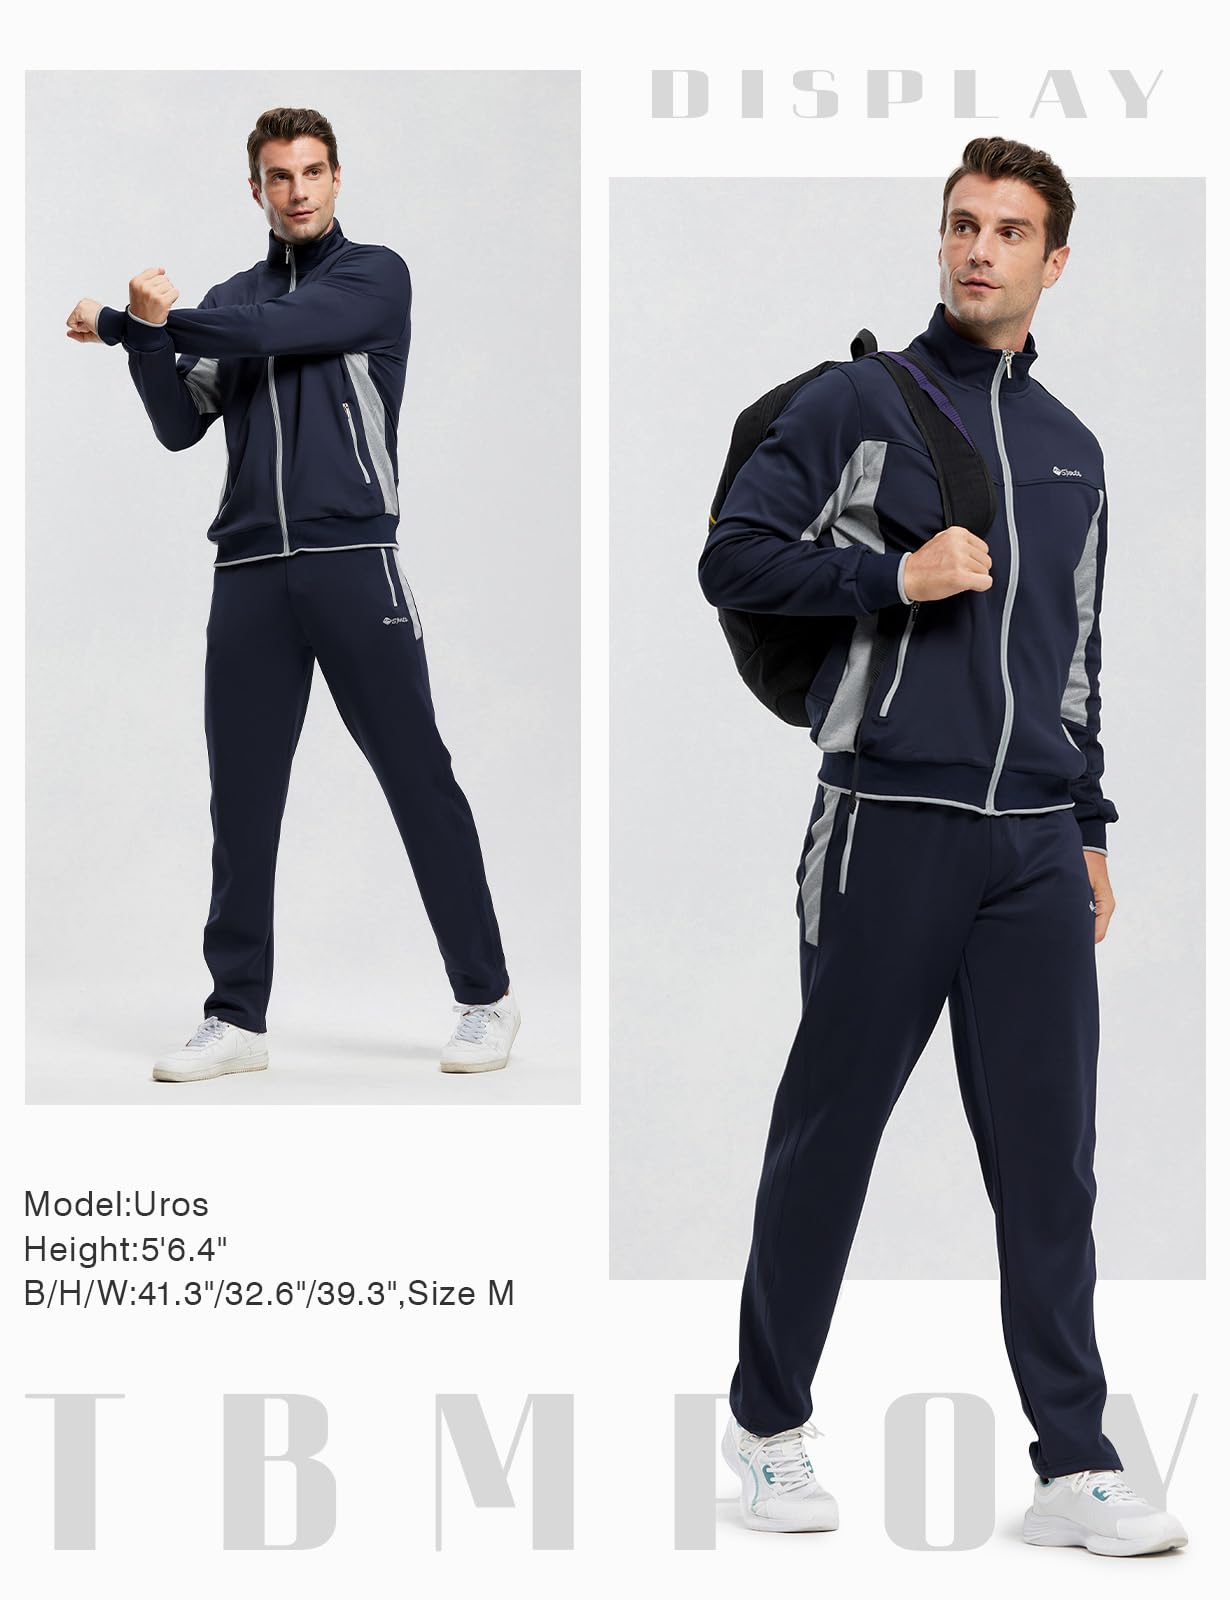 TBMPOY Men's Tracksuits Sweatsuits for Men Set Track Suits 2 Piece Casual Athletic Jogging Warm Up Full Zip Sweat Suits Navy/Grey XL